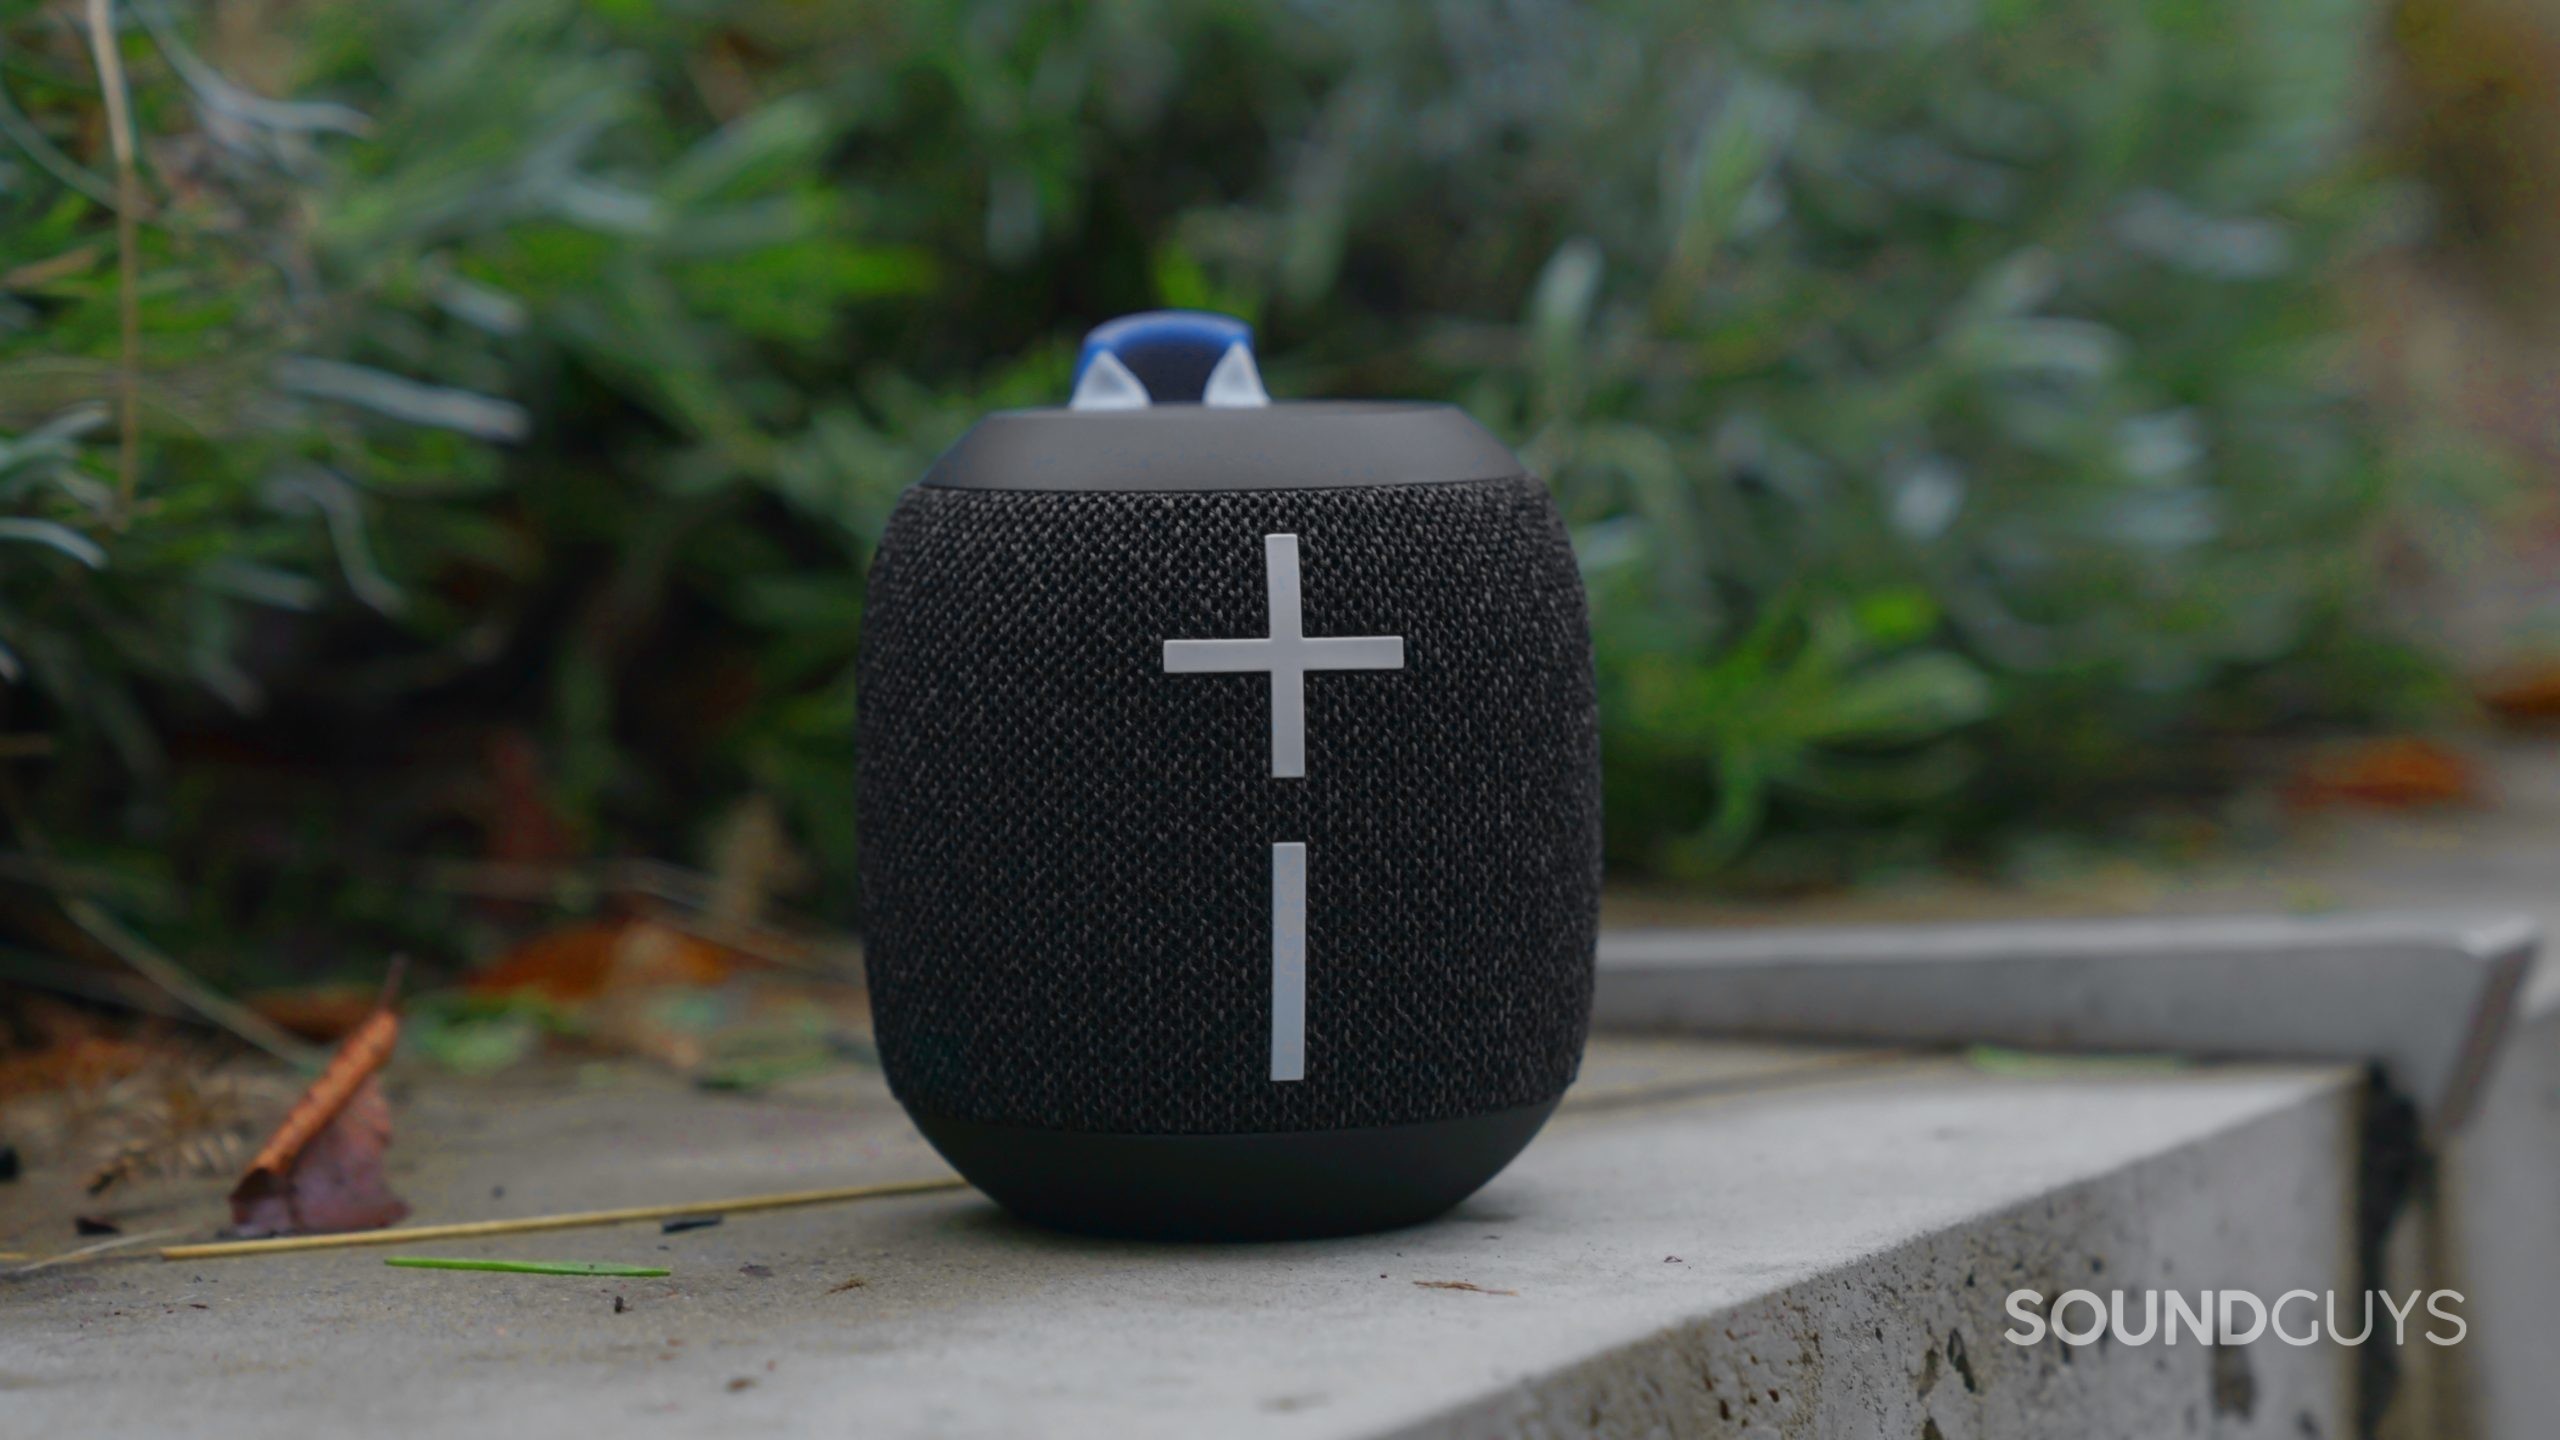 The Ultimate Ears Wonderboom 3 sitting on concrete with the volume controls in clear view.